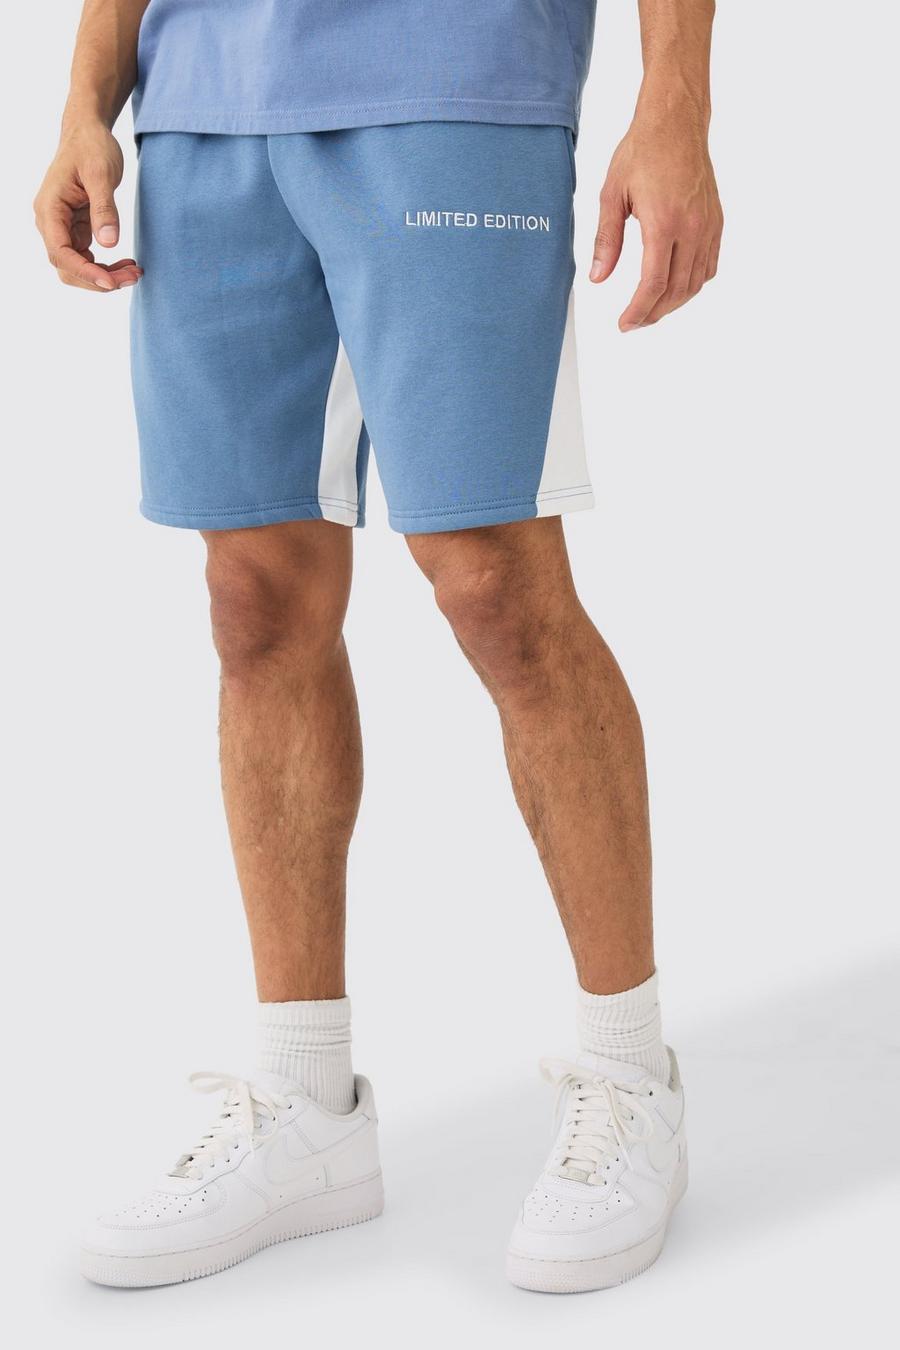 Lockere Limited Edition Shorts, Dusty blue image number 1